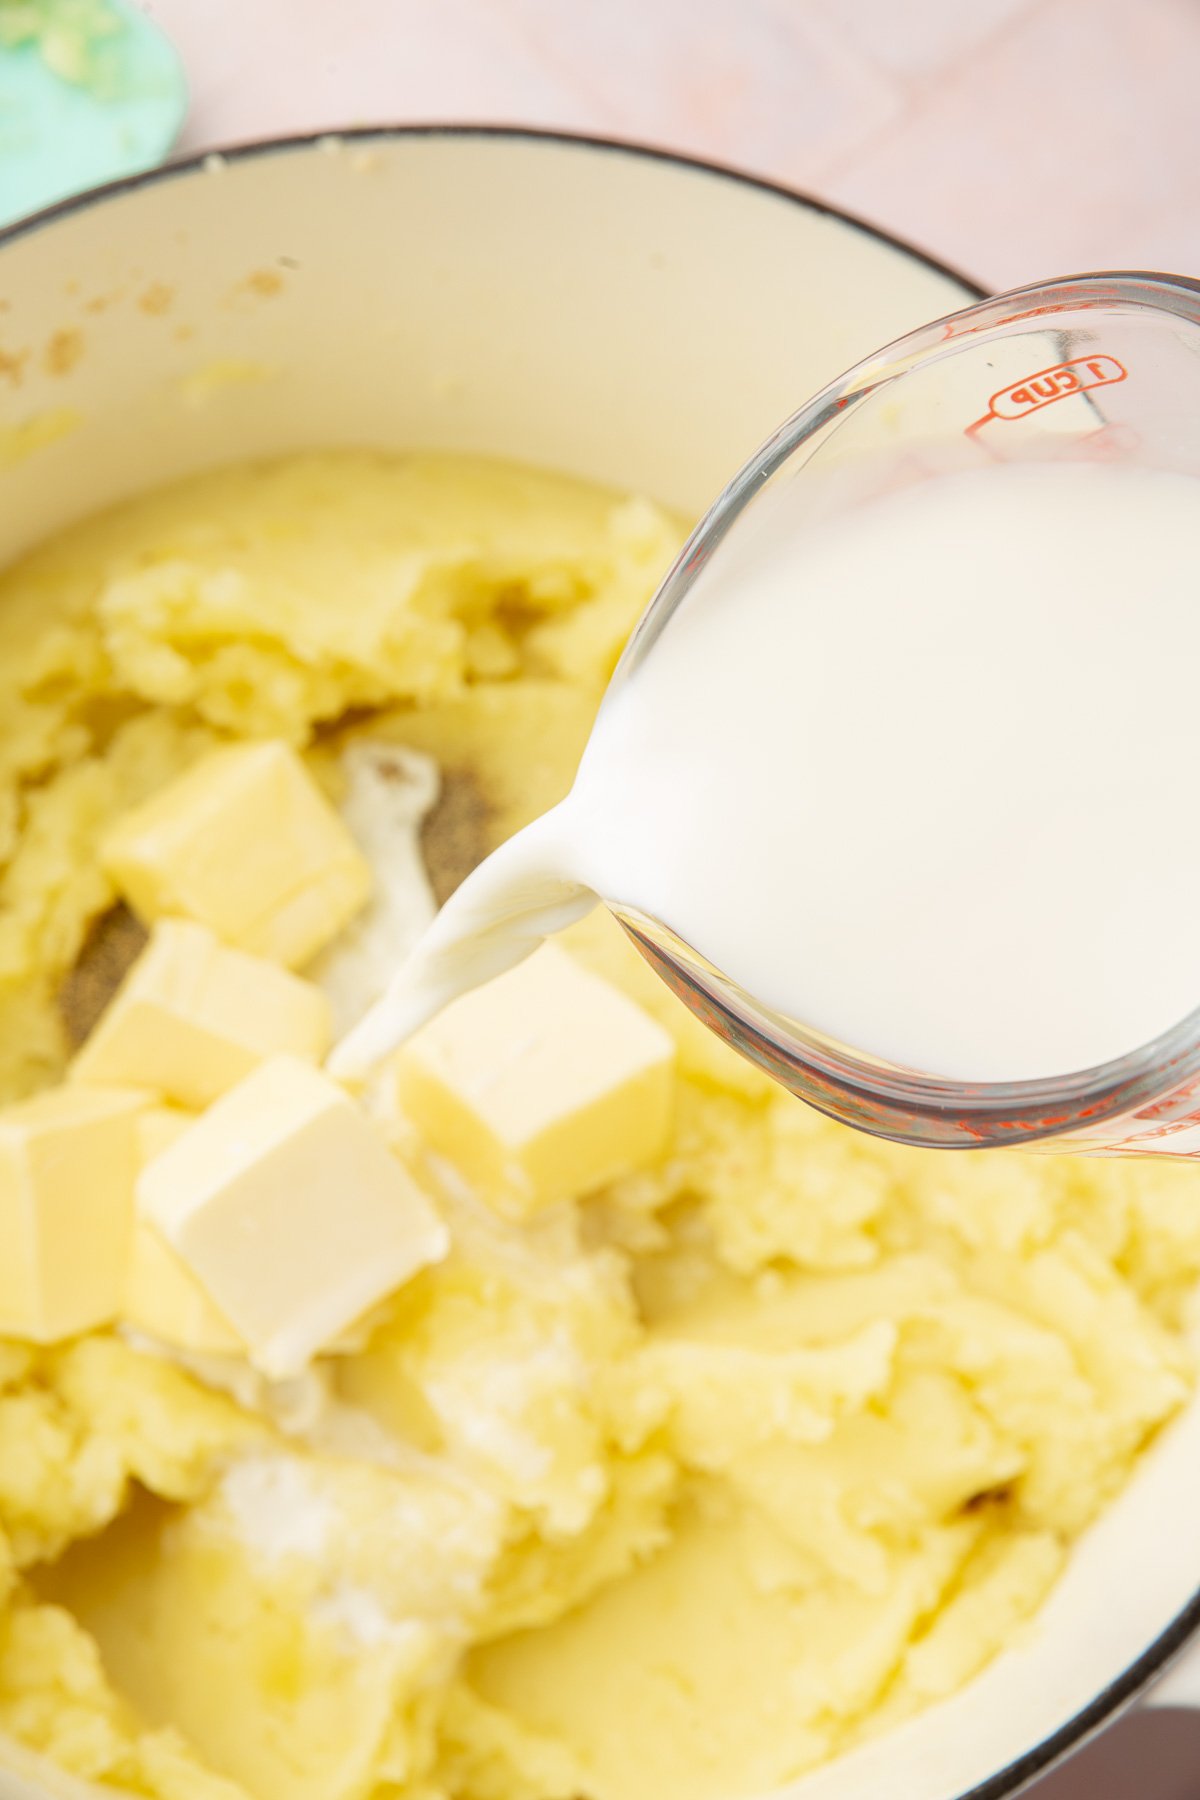 A glass measuring cup of milk being poured into a dutch oven of mashed potatoes with butter.